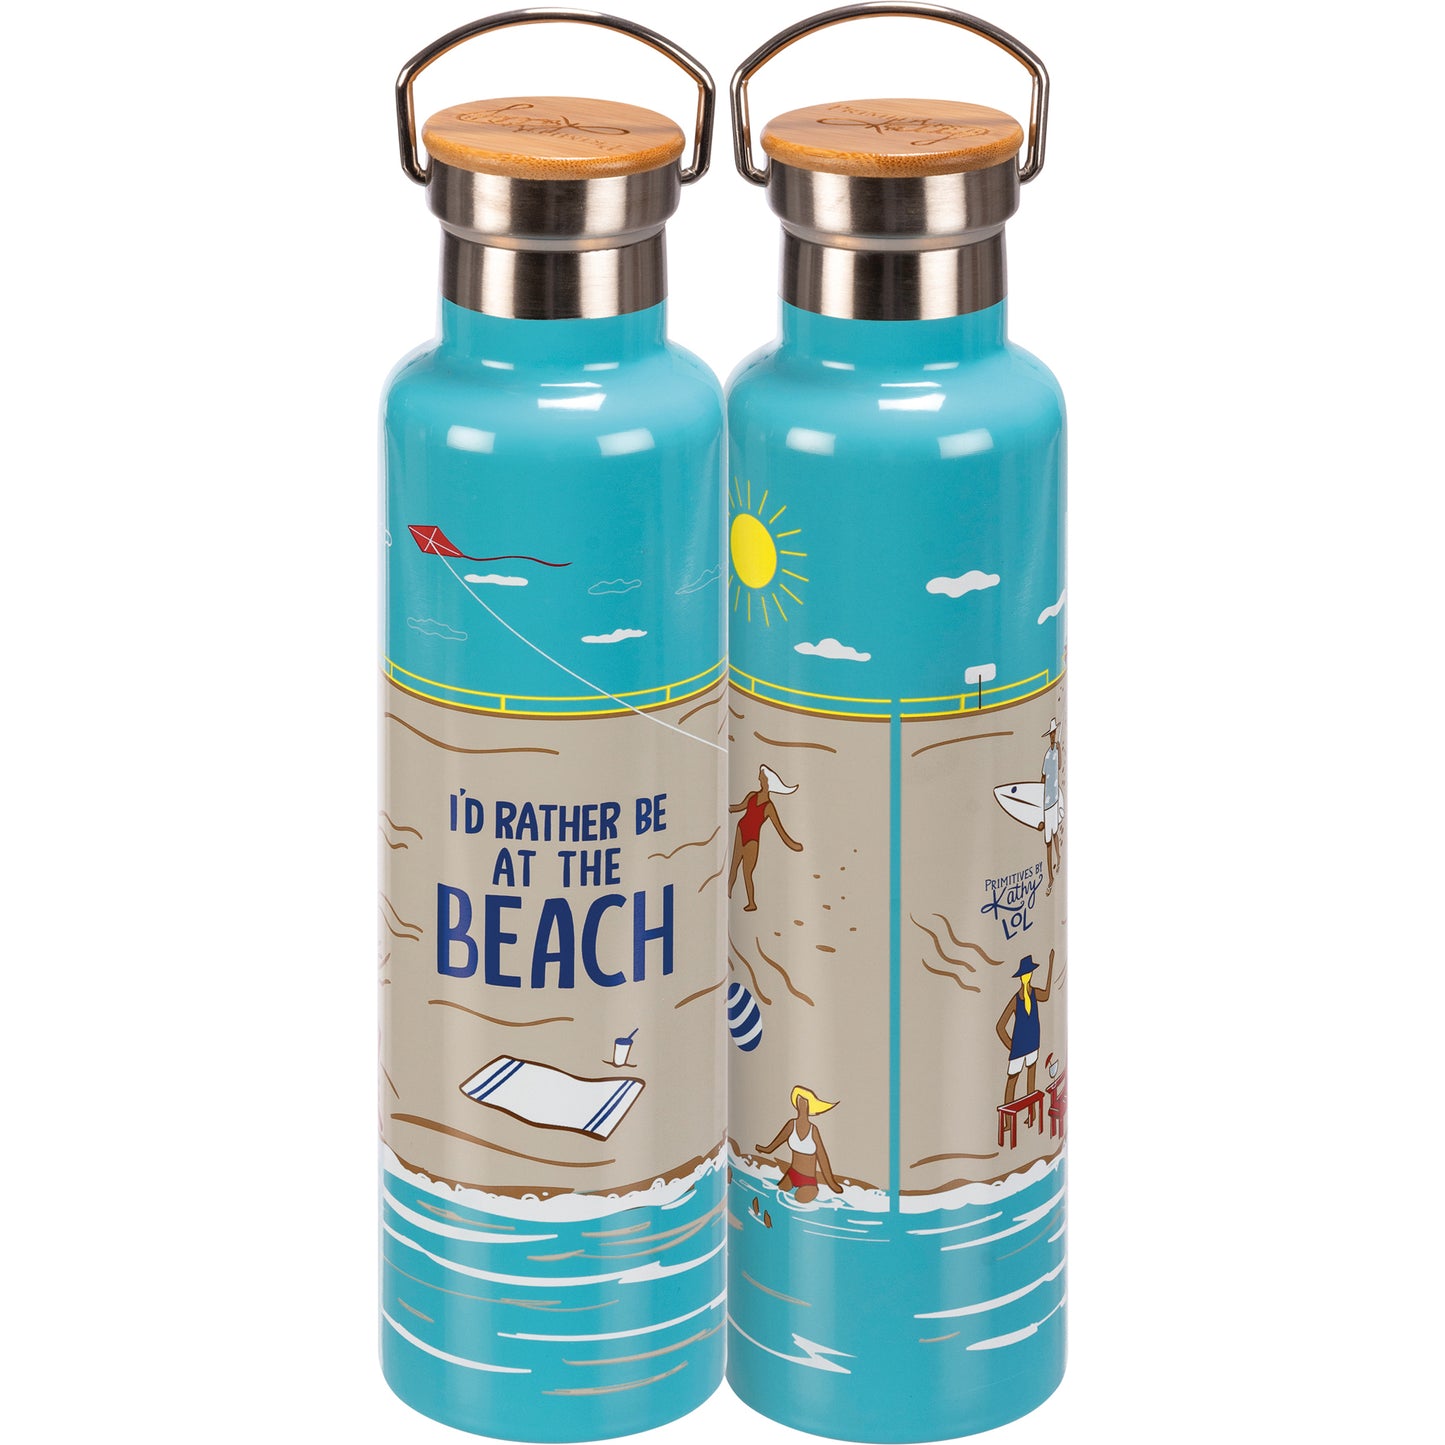 "I'd Rather Be At The Beach" - Insulated Bottle